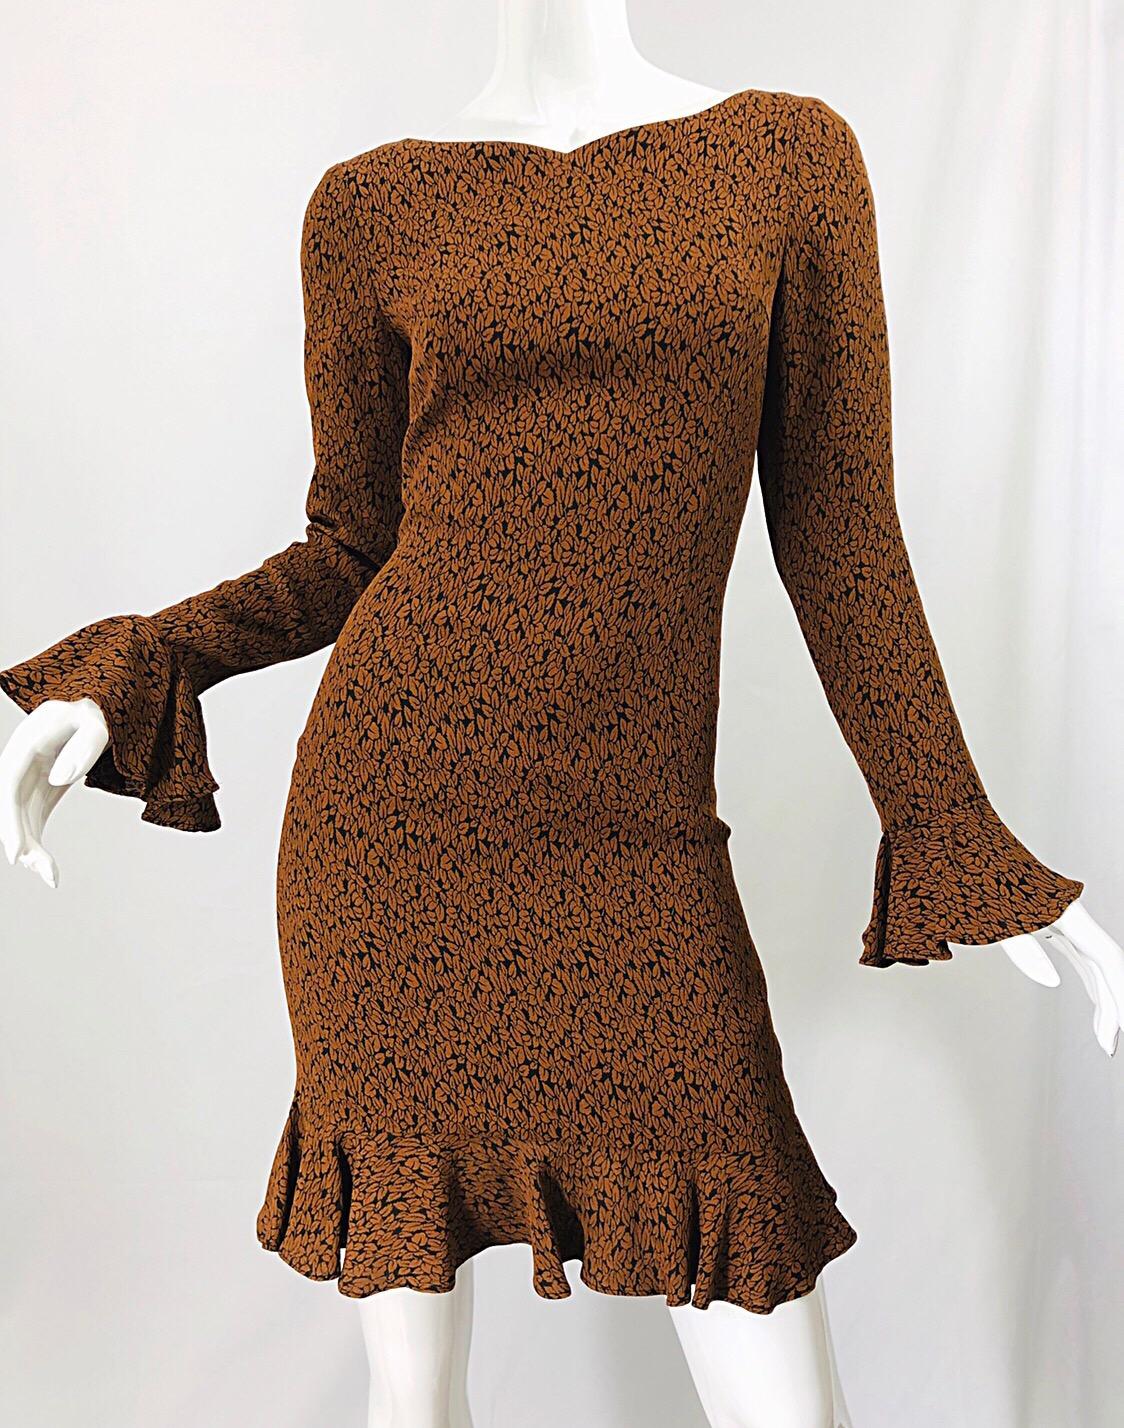 Chic vintage 90s NICOLE MILLER rust + brown leaf print bell sleeve rayon dress! Fitted bodice with a slight sweetheart neckline. Bell sleeves mirror the flirty ruffle hem. Hidden zipper up the back with hook-and-eye closure. Fully lined. Can easily